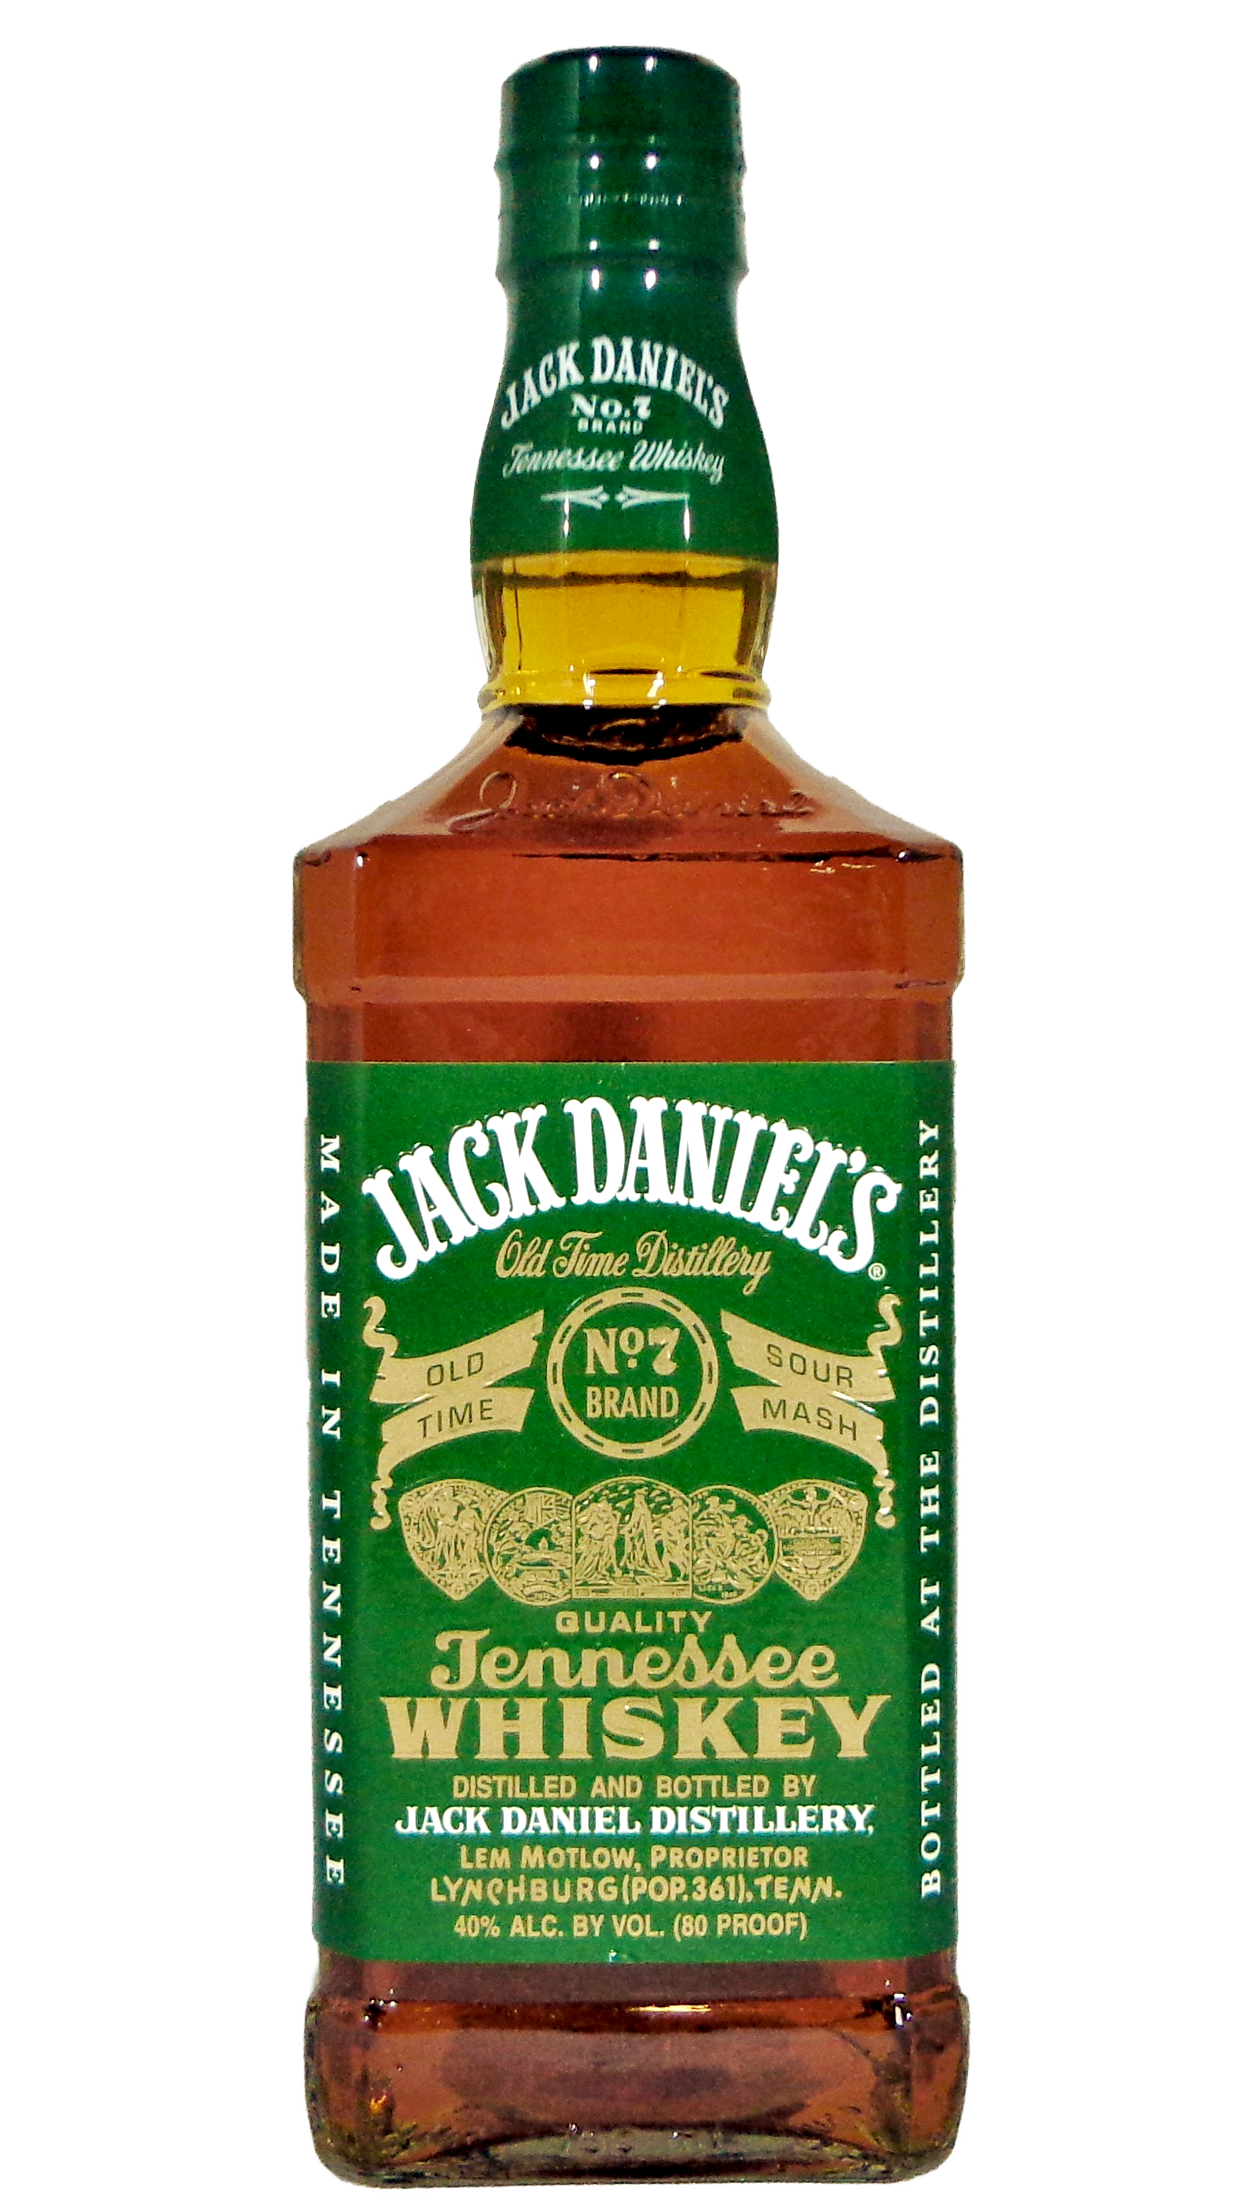 BUY] Jack Daniel's Old No. 7 Green Label Sour Mash Tennessee